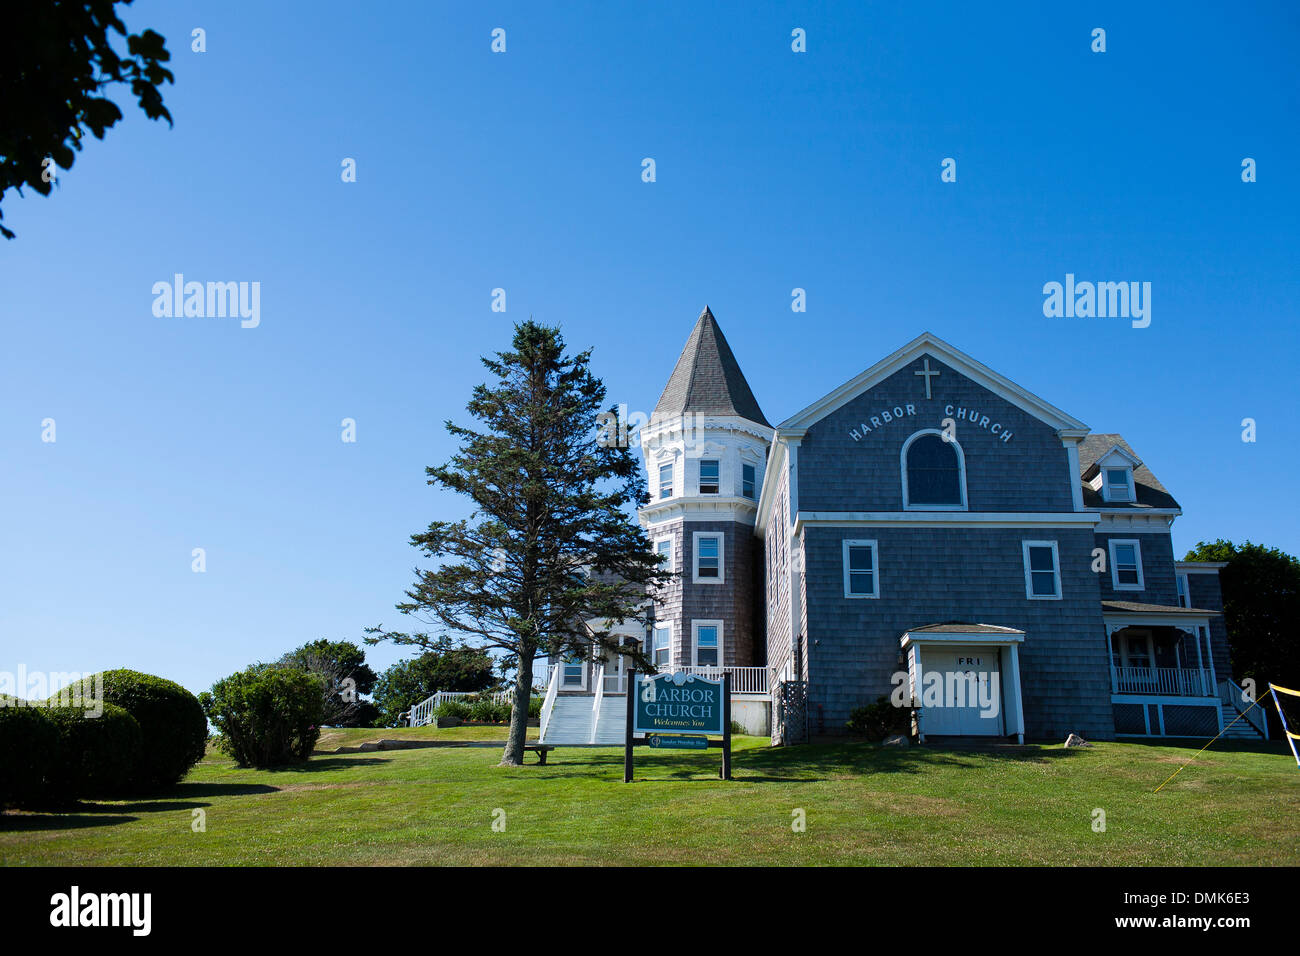 The harbor church in Old Harbor on Block island, Rhode Island, USA, a popular New England vacation location Stock Photo